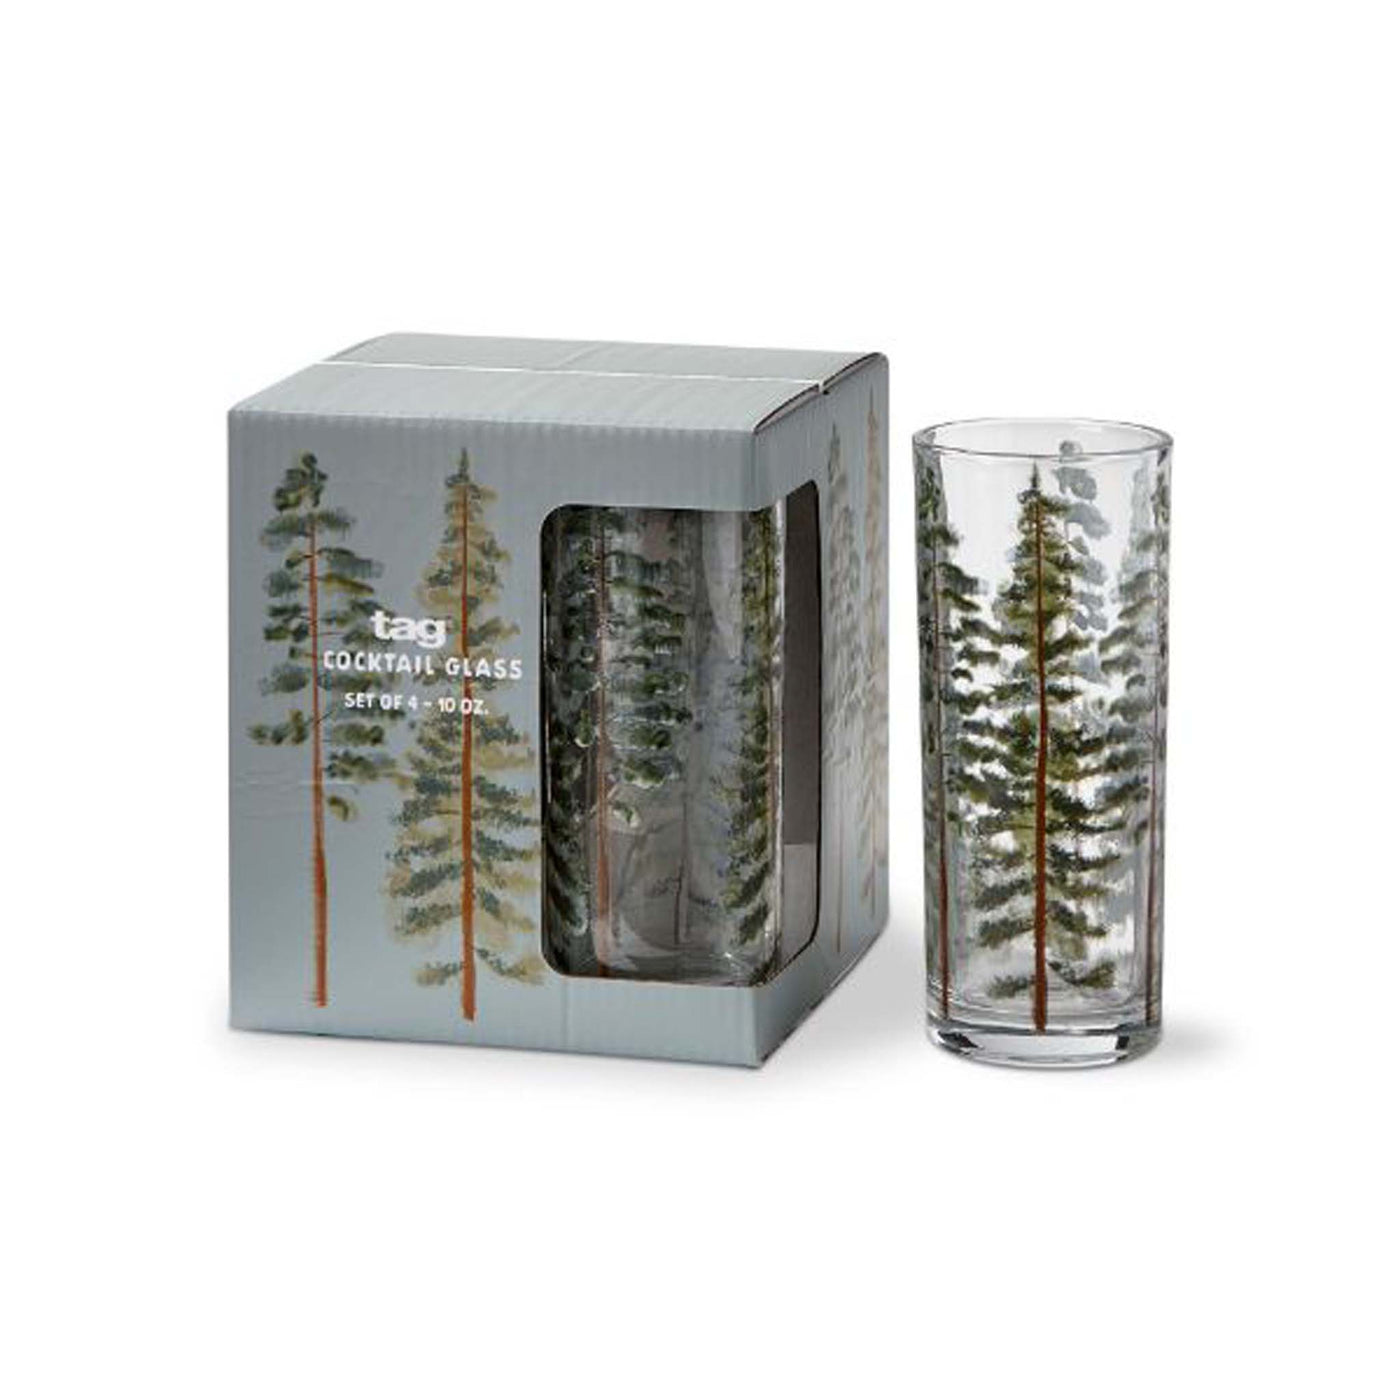 Tree Lined Drinks Glass (Set of 4)